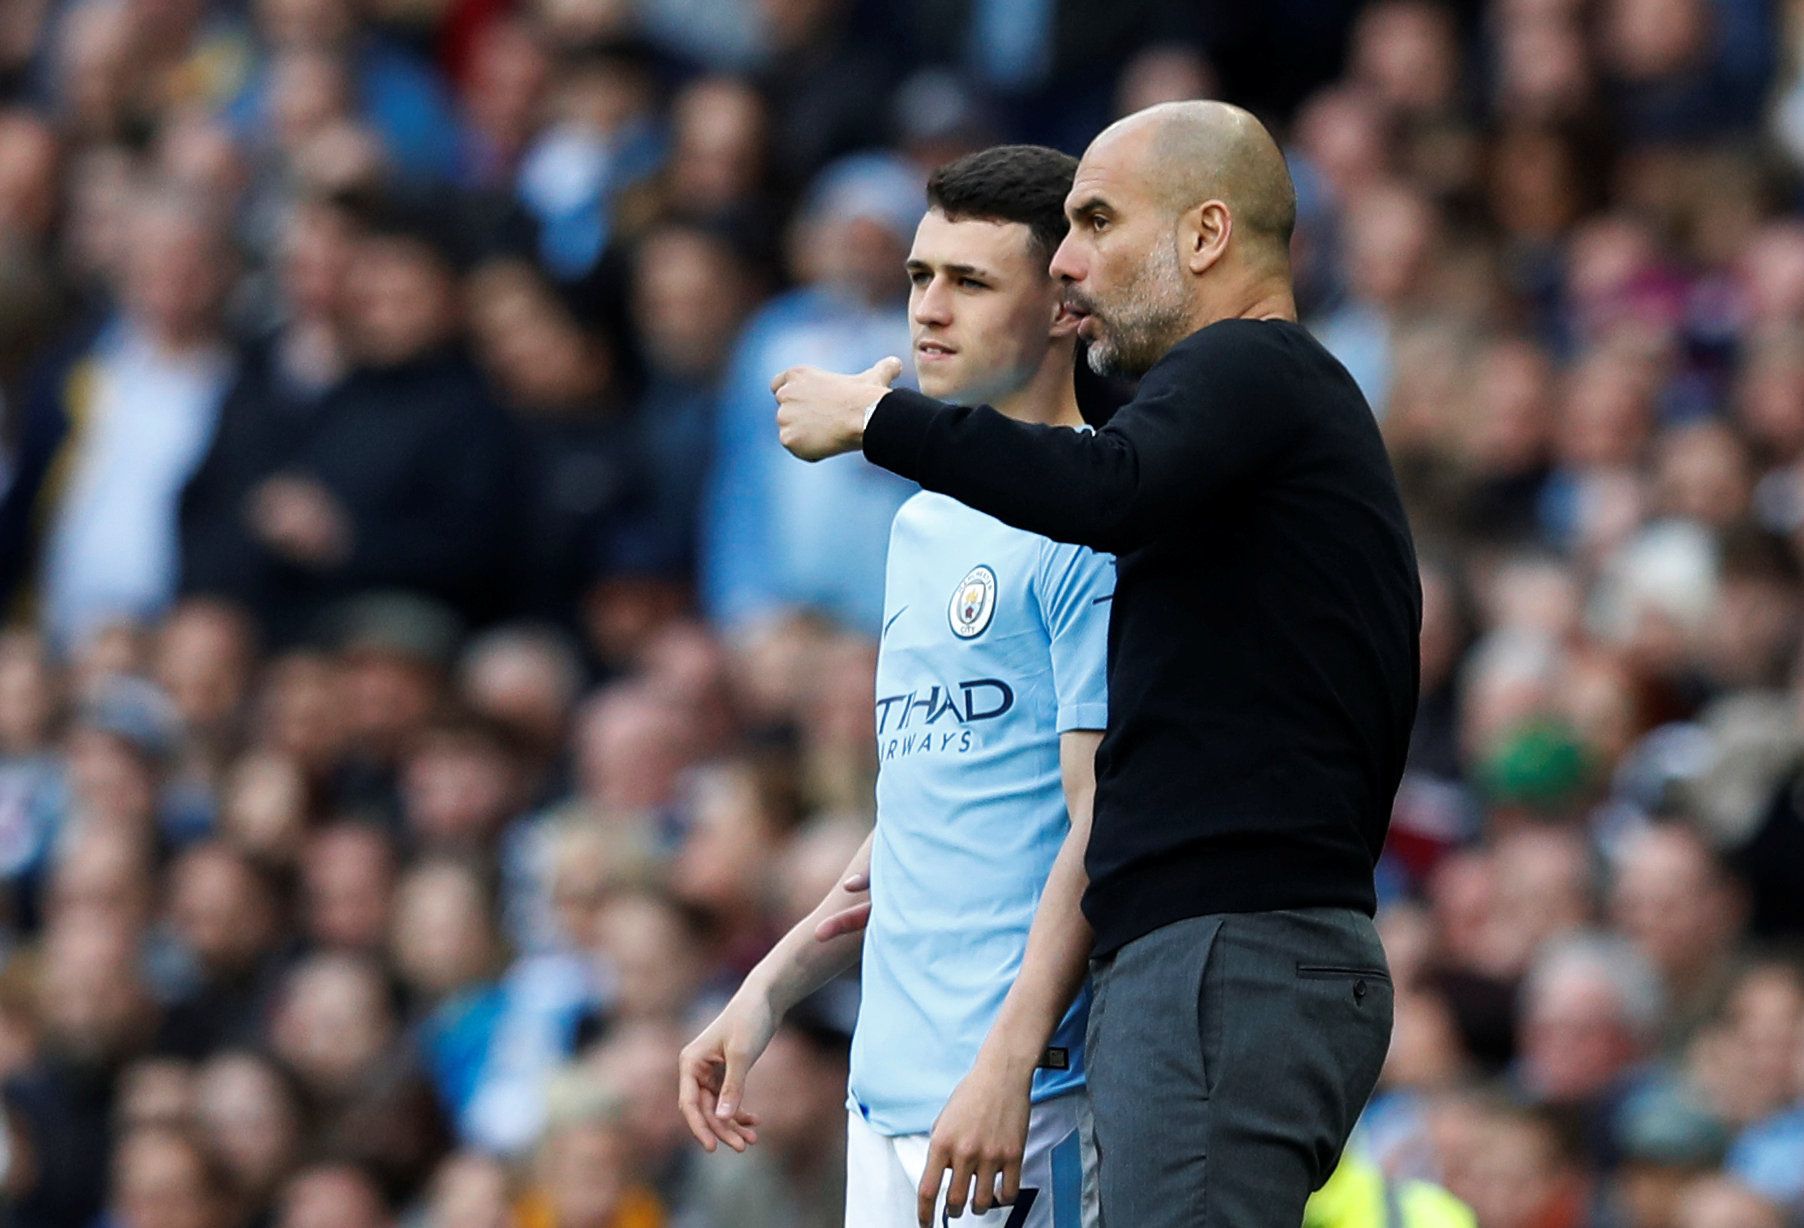 Manchester City boss Pep Guardiola gives Phil Foden instructions on the touchline